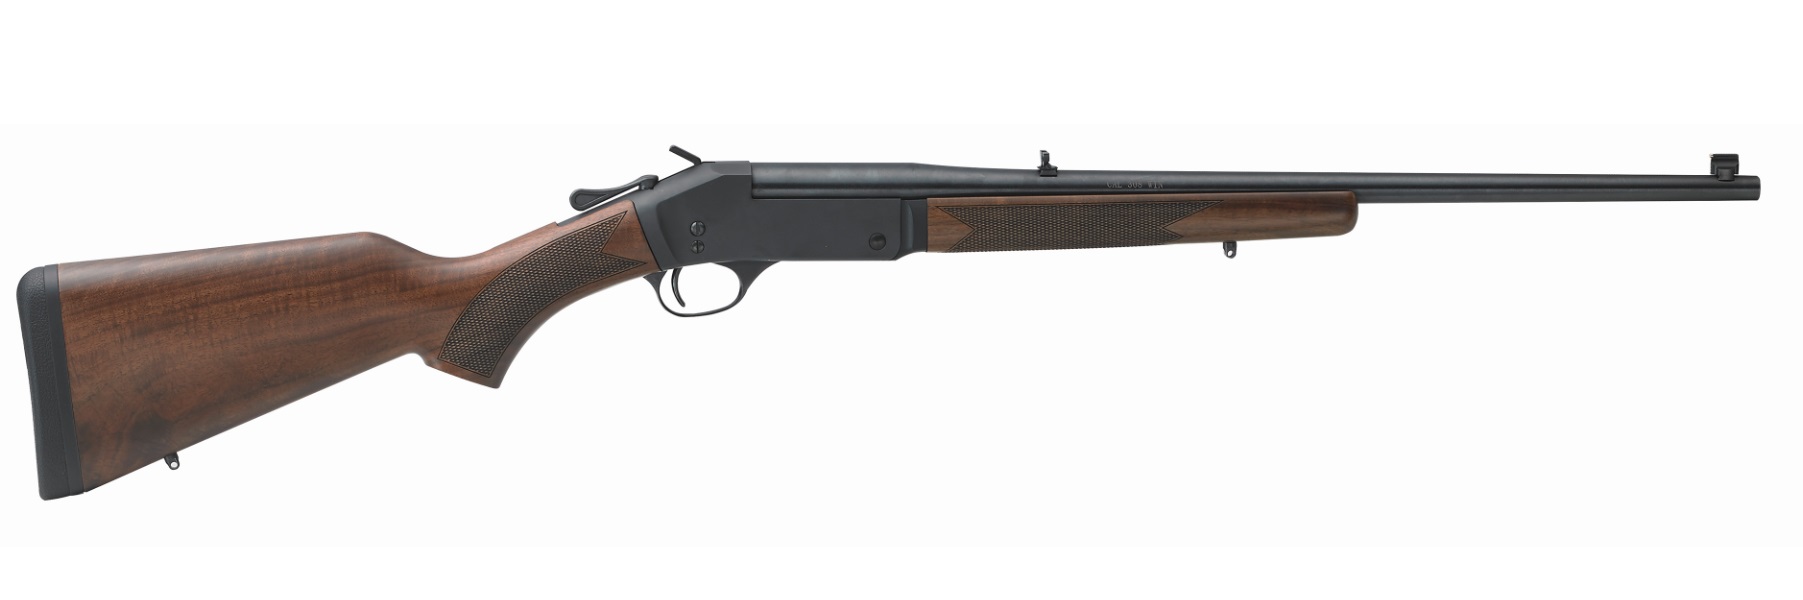 Henry Repeating Arms Henry Singleshot Rifle 223 Rem